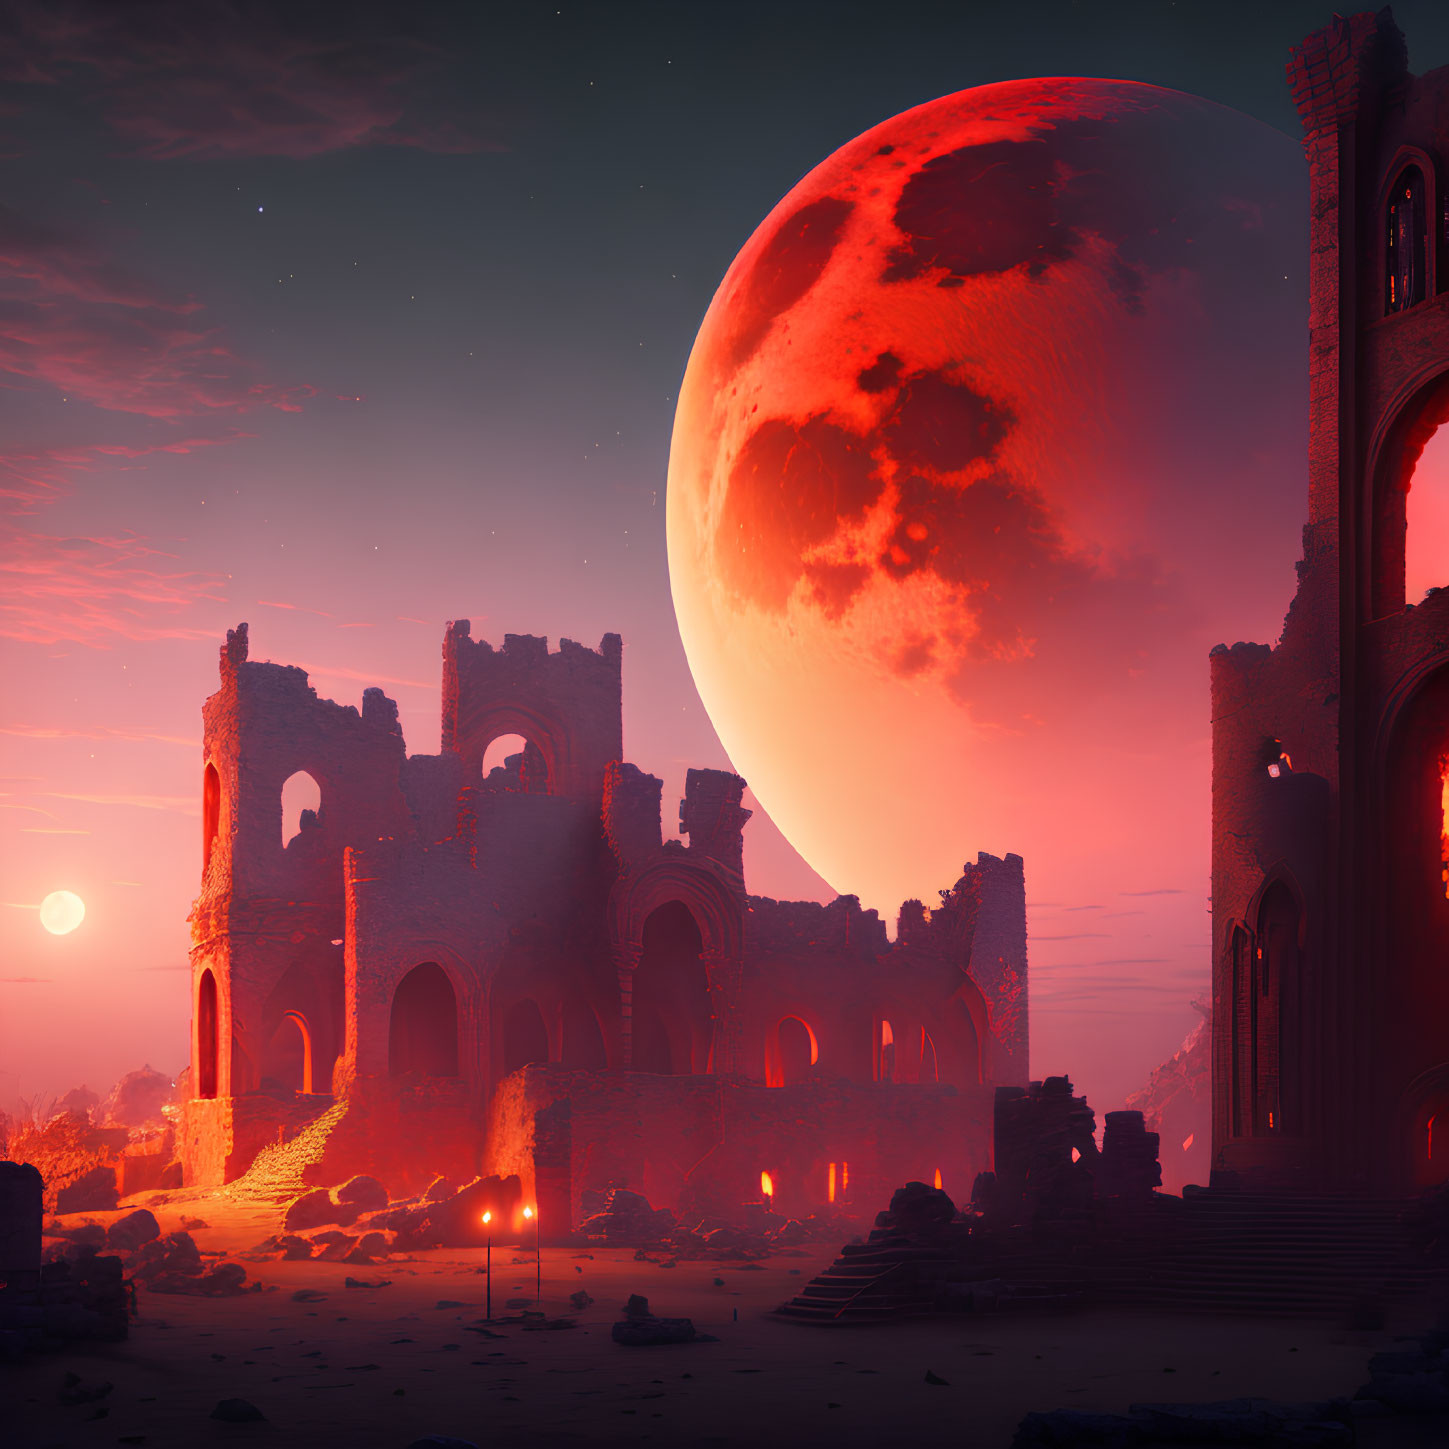 Ancient structure ruins under red moon with torches in twilight